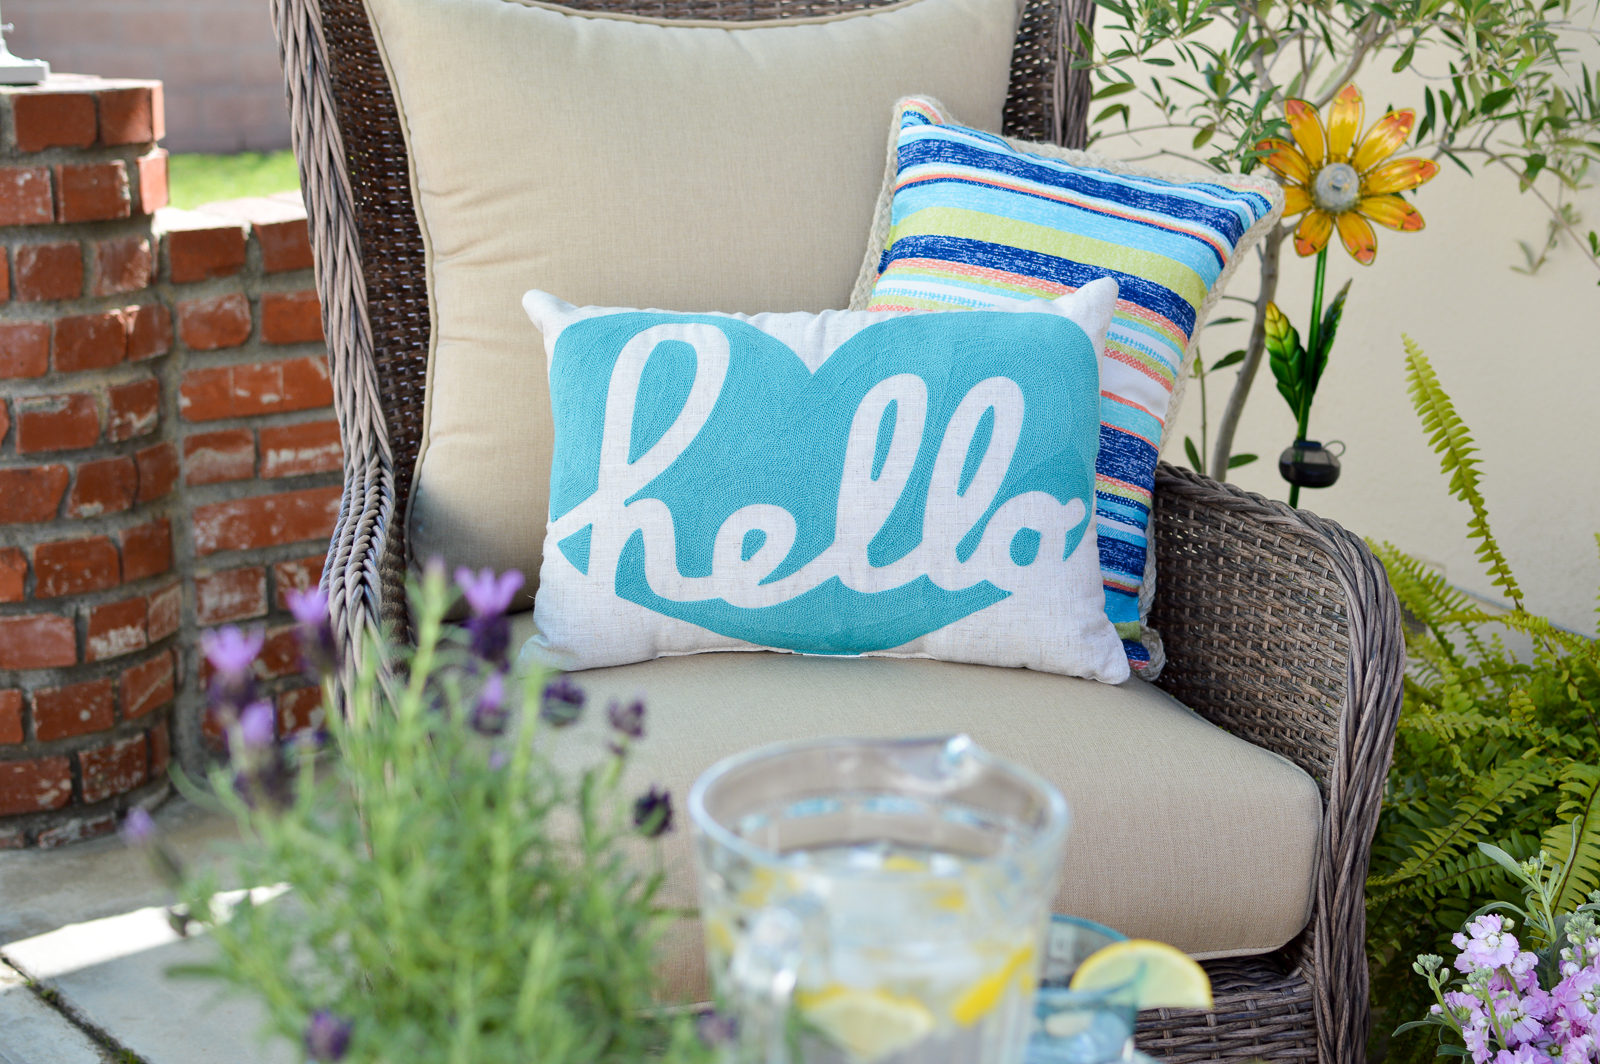 Small Space Patio Decorating Ideas with Really Comfortable Outdoor Furniture www.foxhollowcottage.com #sponsored with Better Homes & Gardens. Find it at Walmart